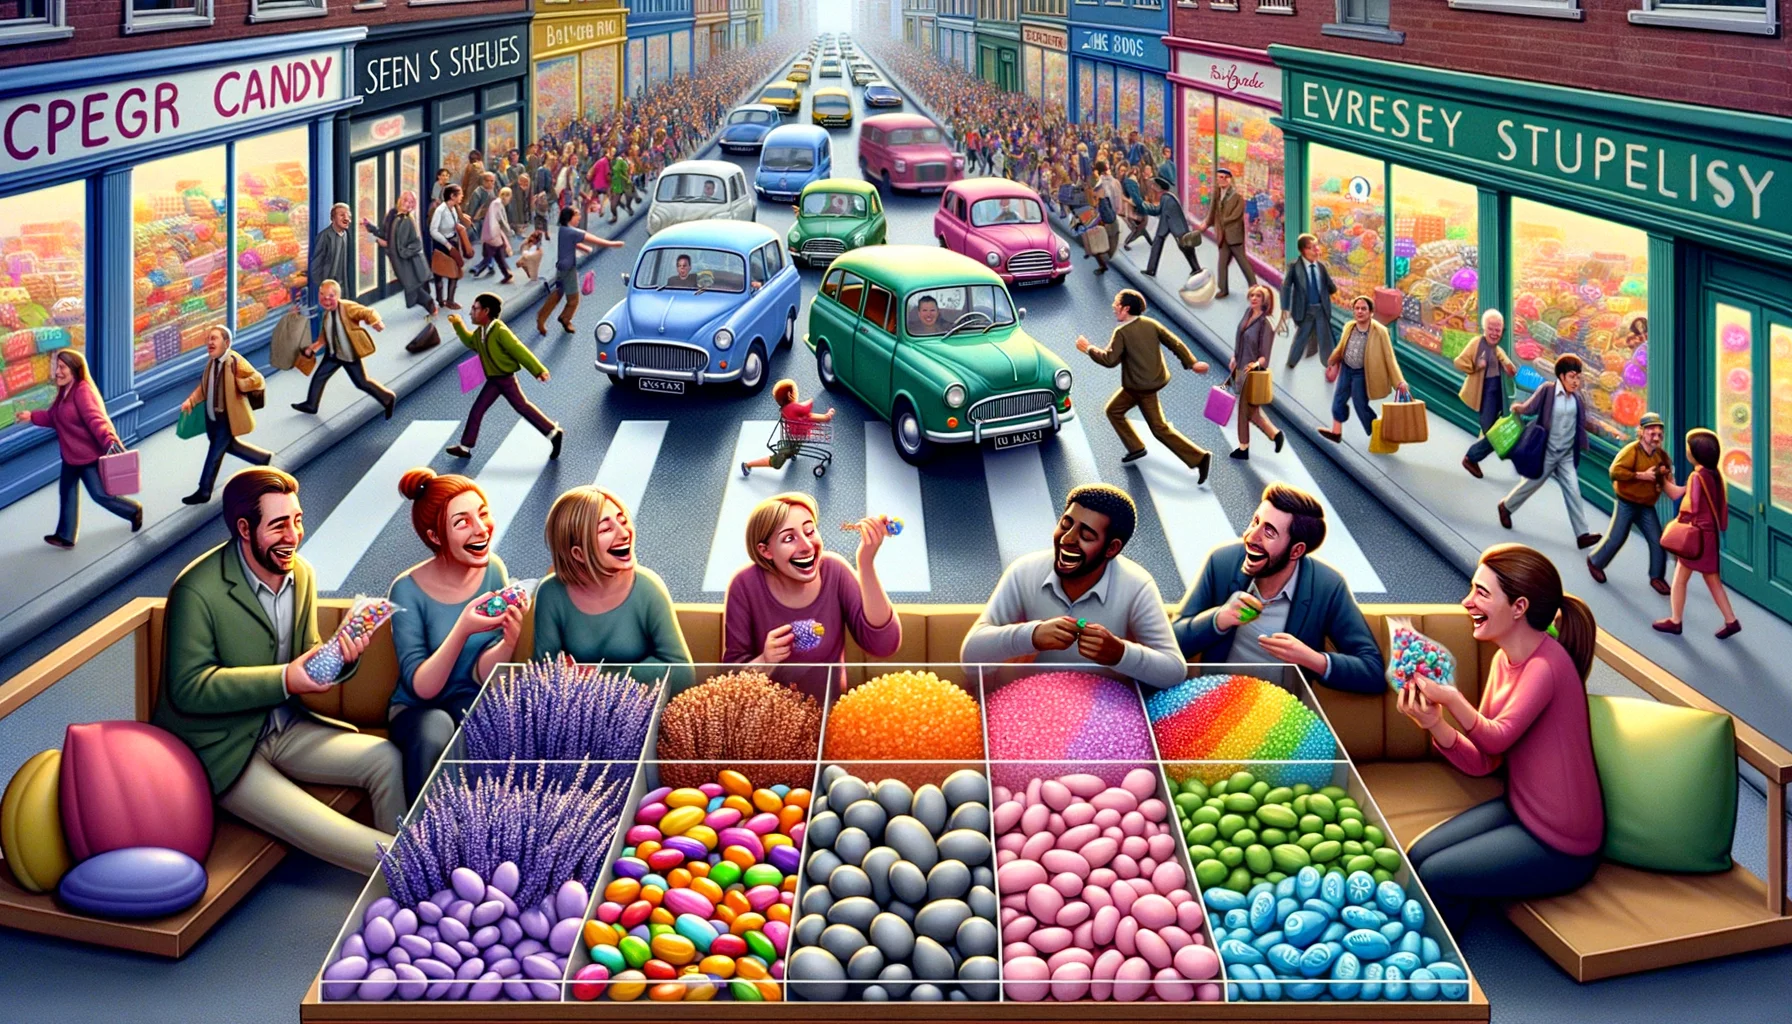 Imagine a humorous and realistic scene depicting the ideal scenario for 'Candy for Reducing Anxiety and Stress'. In the foreground, there's a vibrant candy shop display showing a colourful assortment of this specialty candy. The candies come in all shapes and sizes, each designed to mimic calming items like lavender flowers, zen stones, and cute stress balls. A few customers, made up of a Caucasian male and a South Asian female, are laughing while choosing their candies, nonchalantly ignoring the chaos outside - a comically exaggerated scene of urban hustle with cars honking, people running for buses.